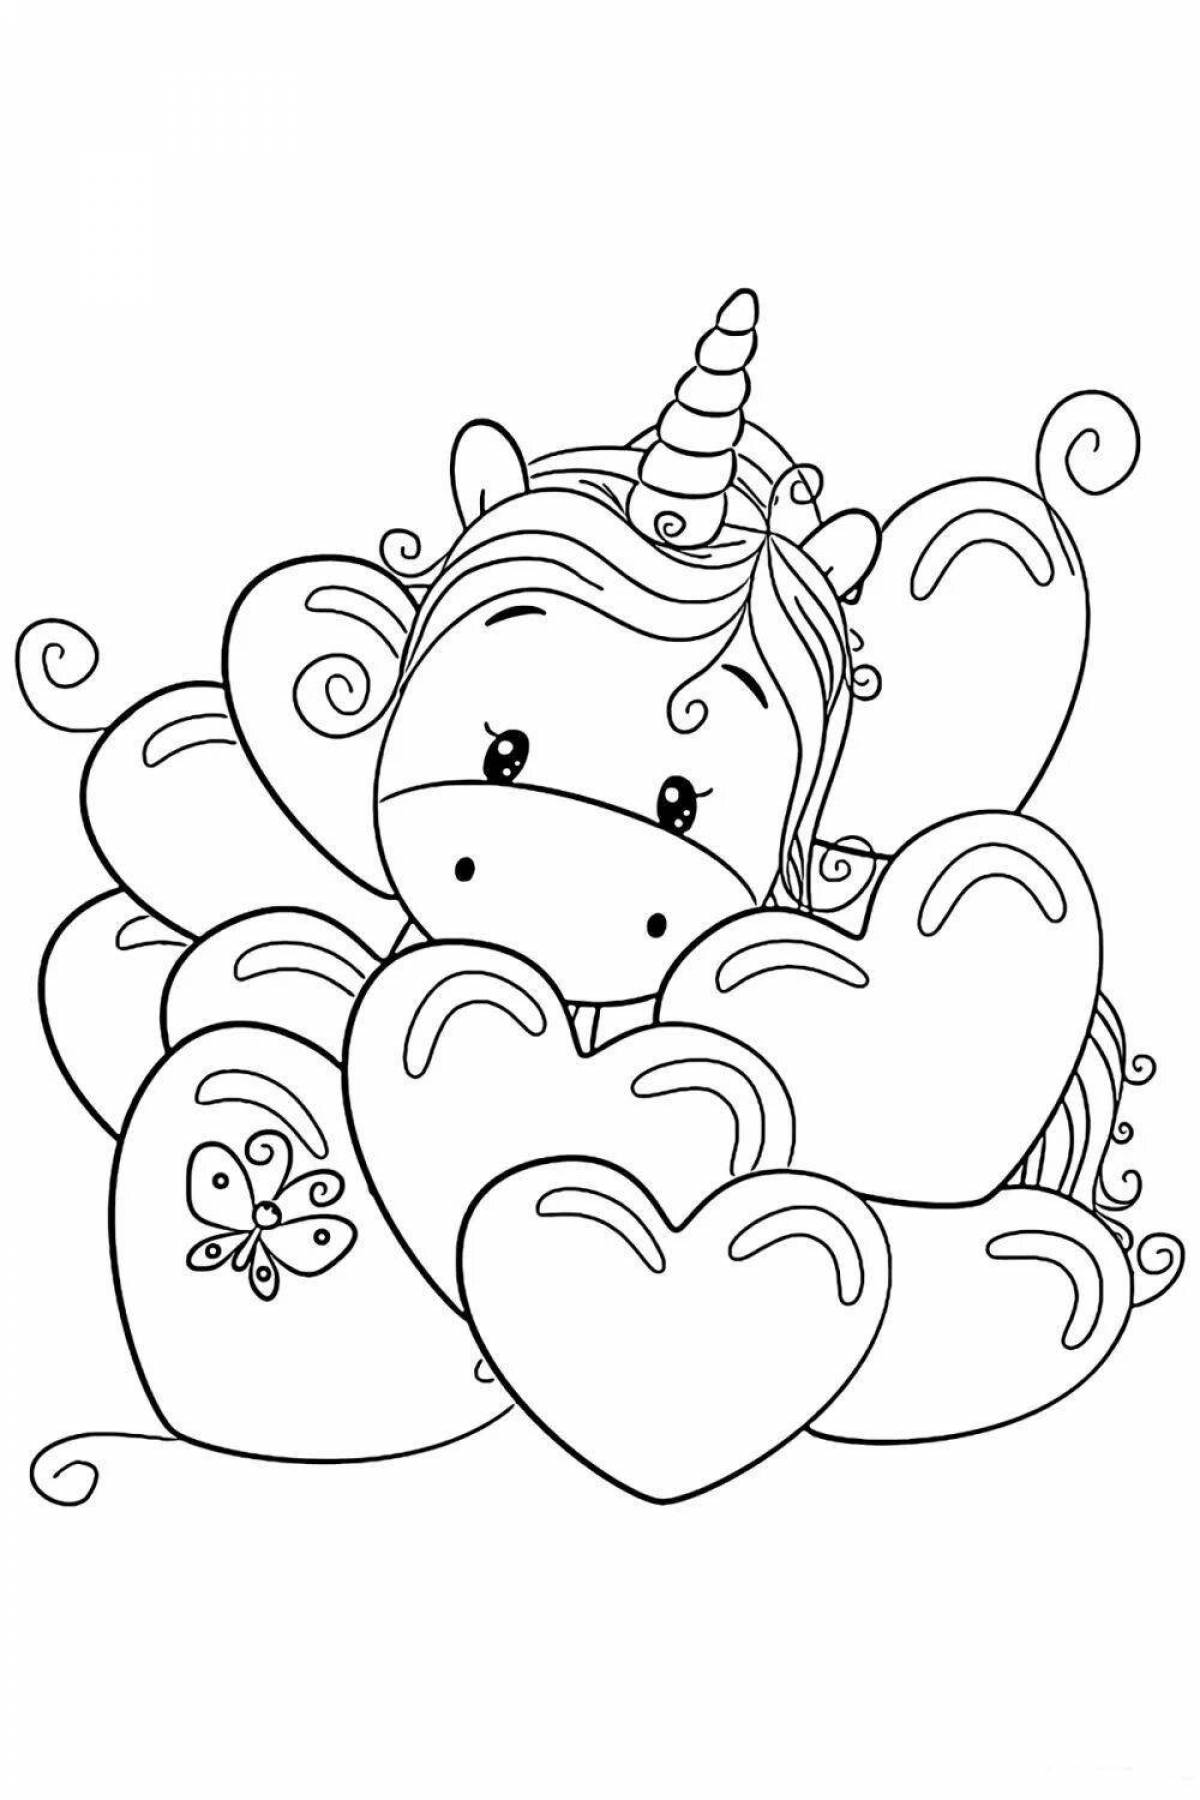 Relaxing valentine coloring for kids